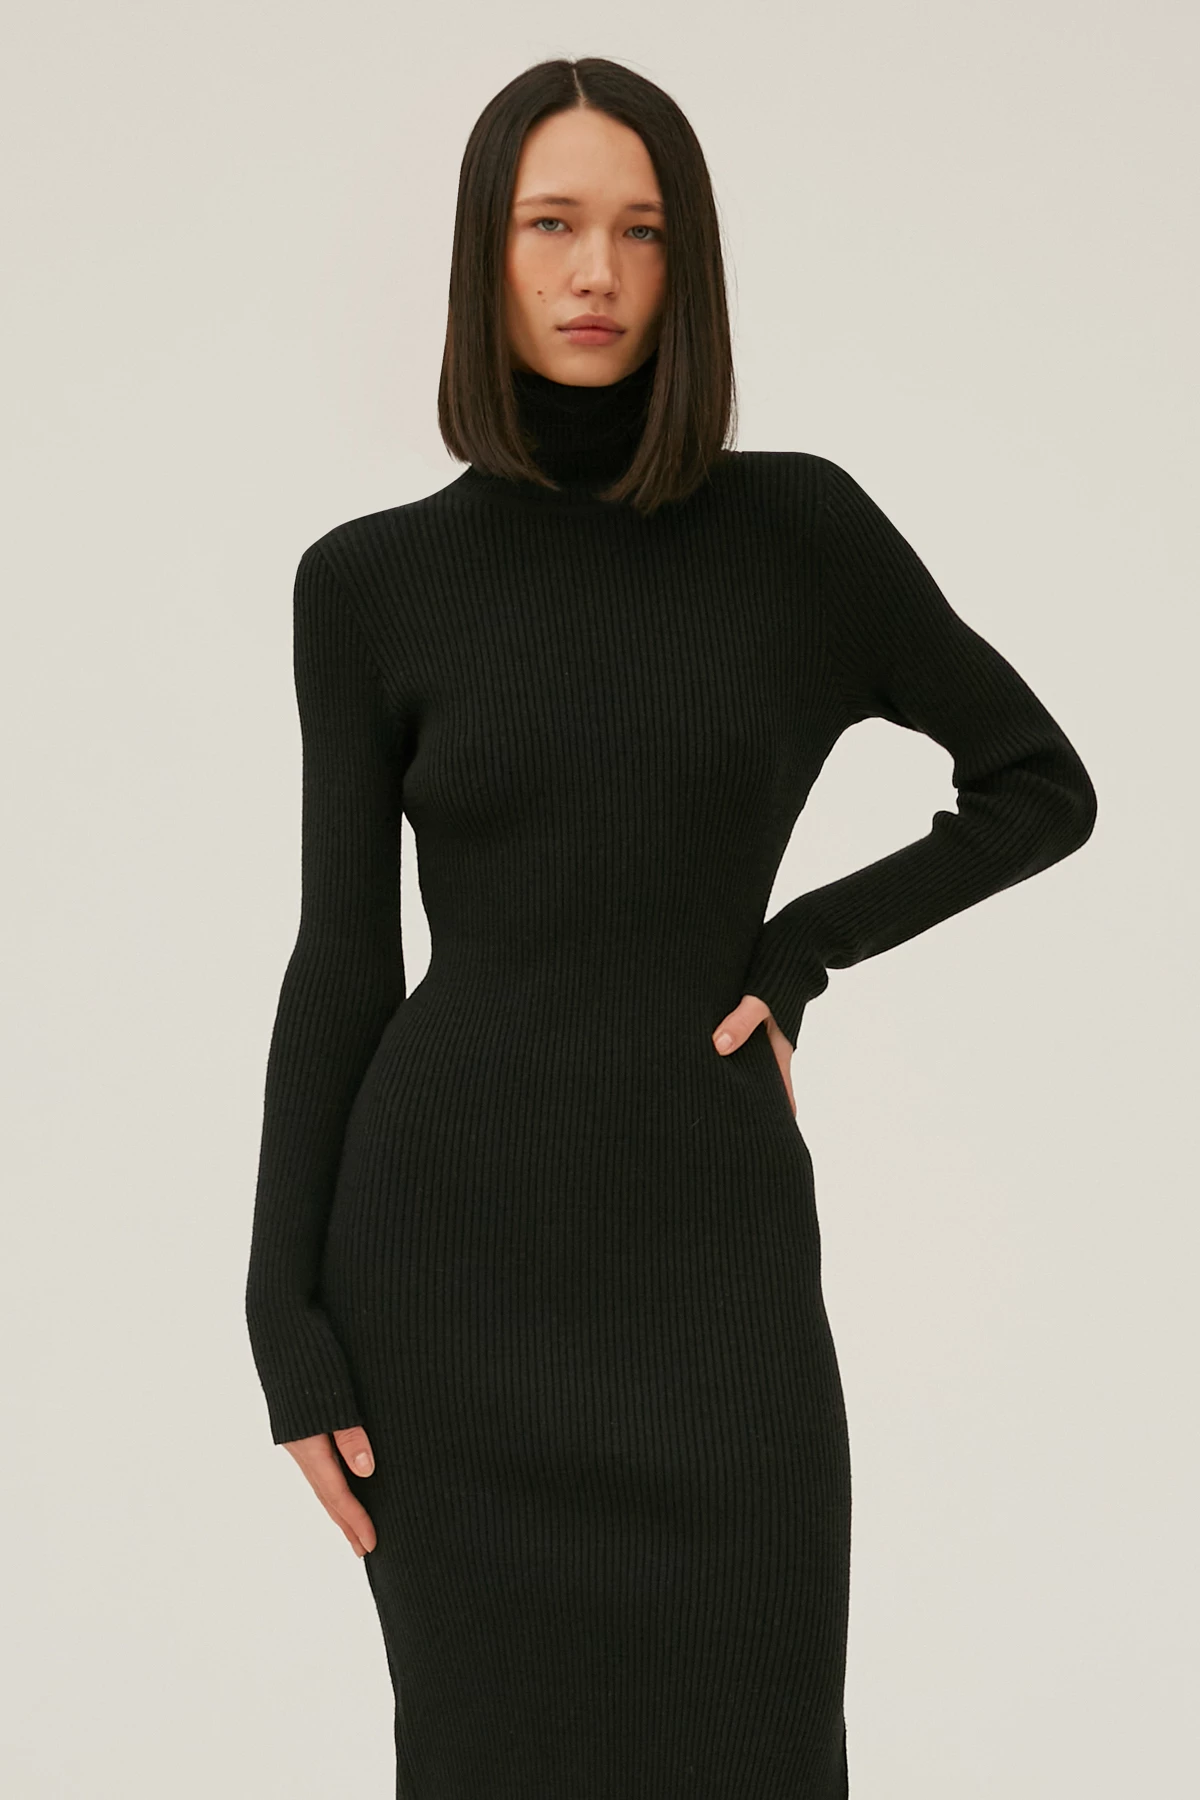 Knitted black dress with neckline and viscose, photo 1